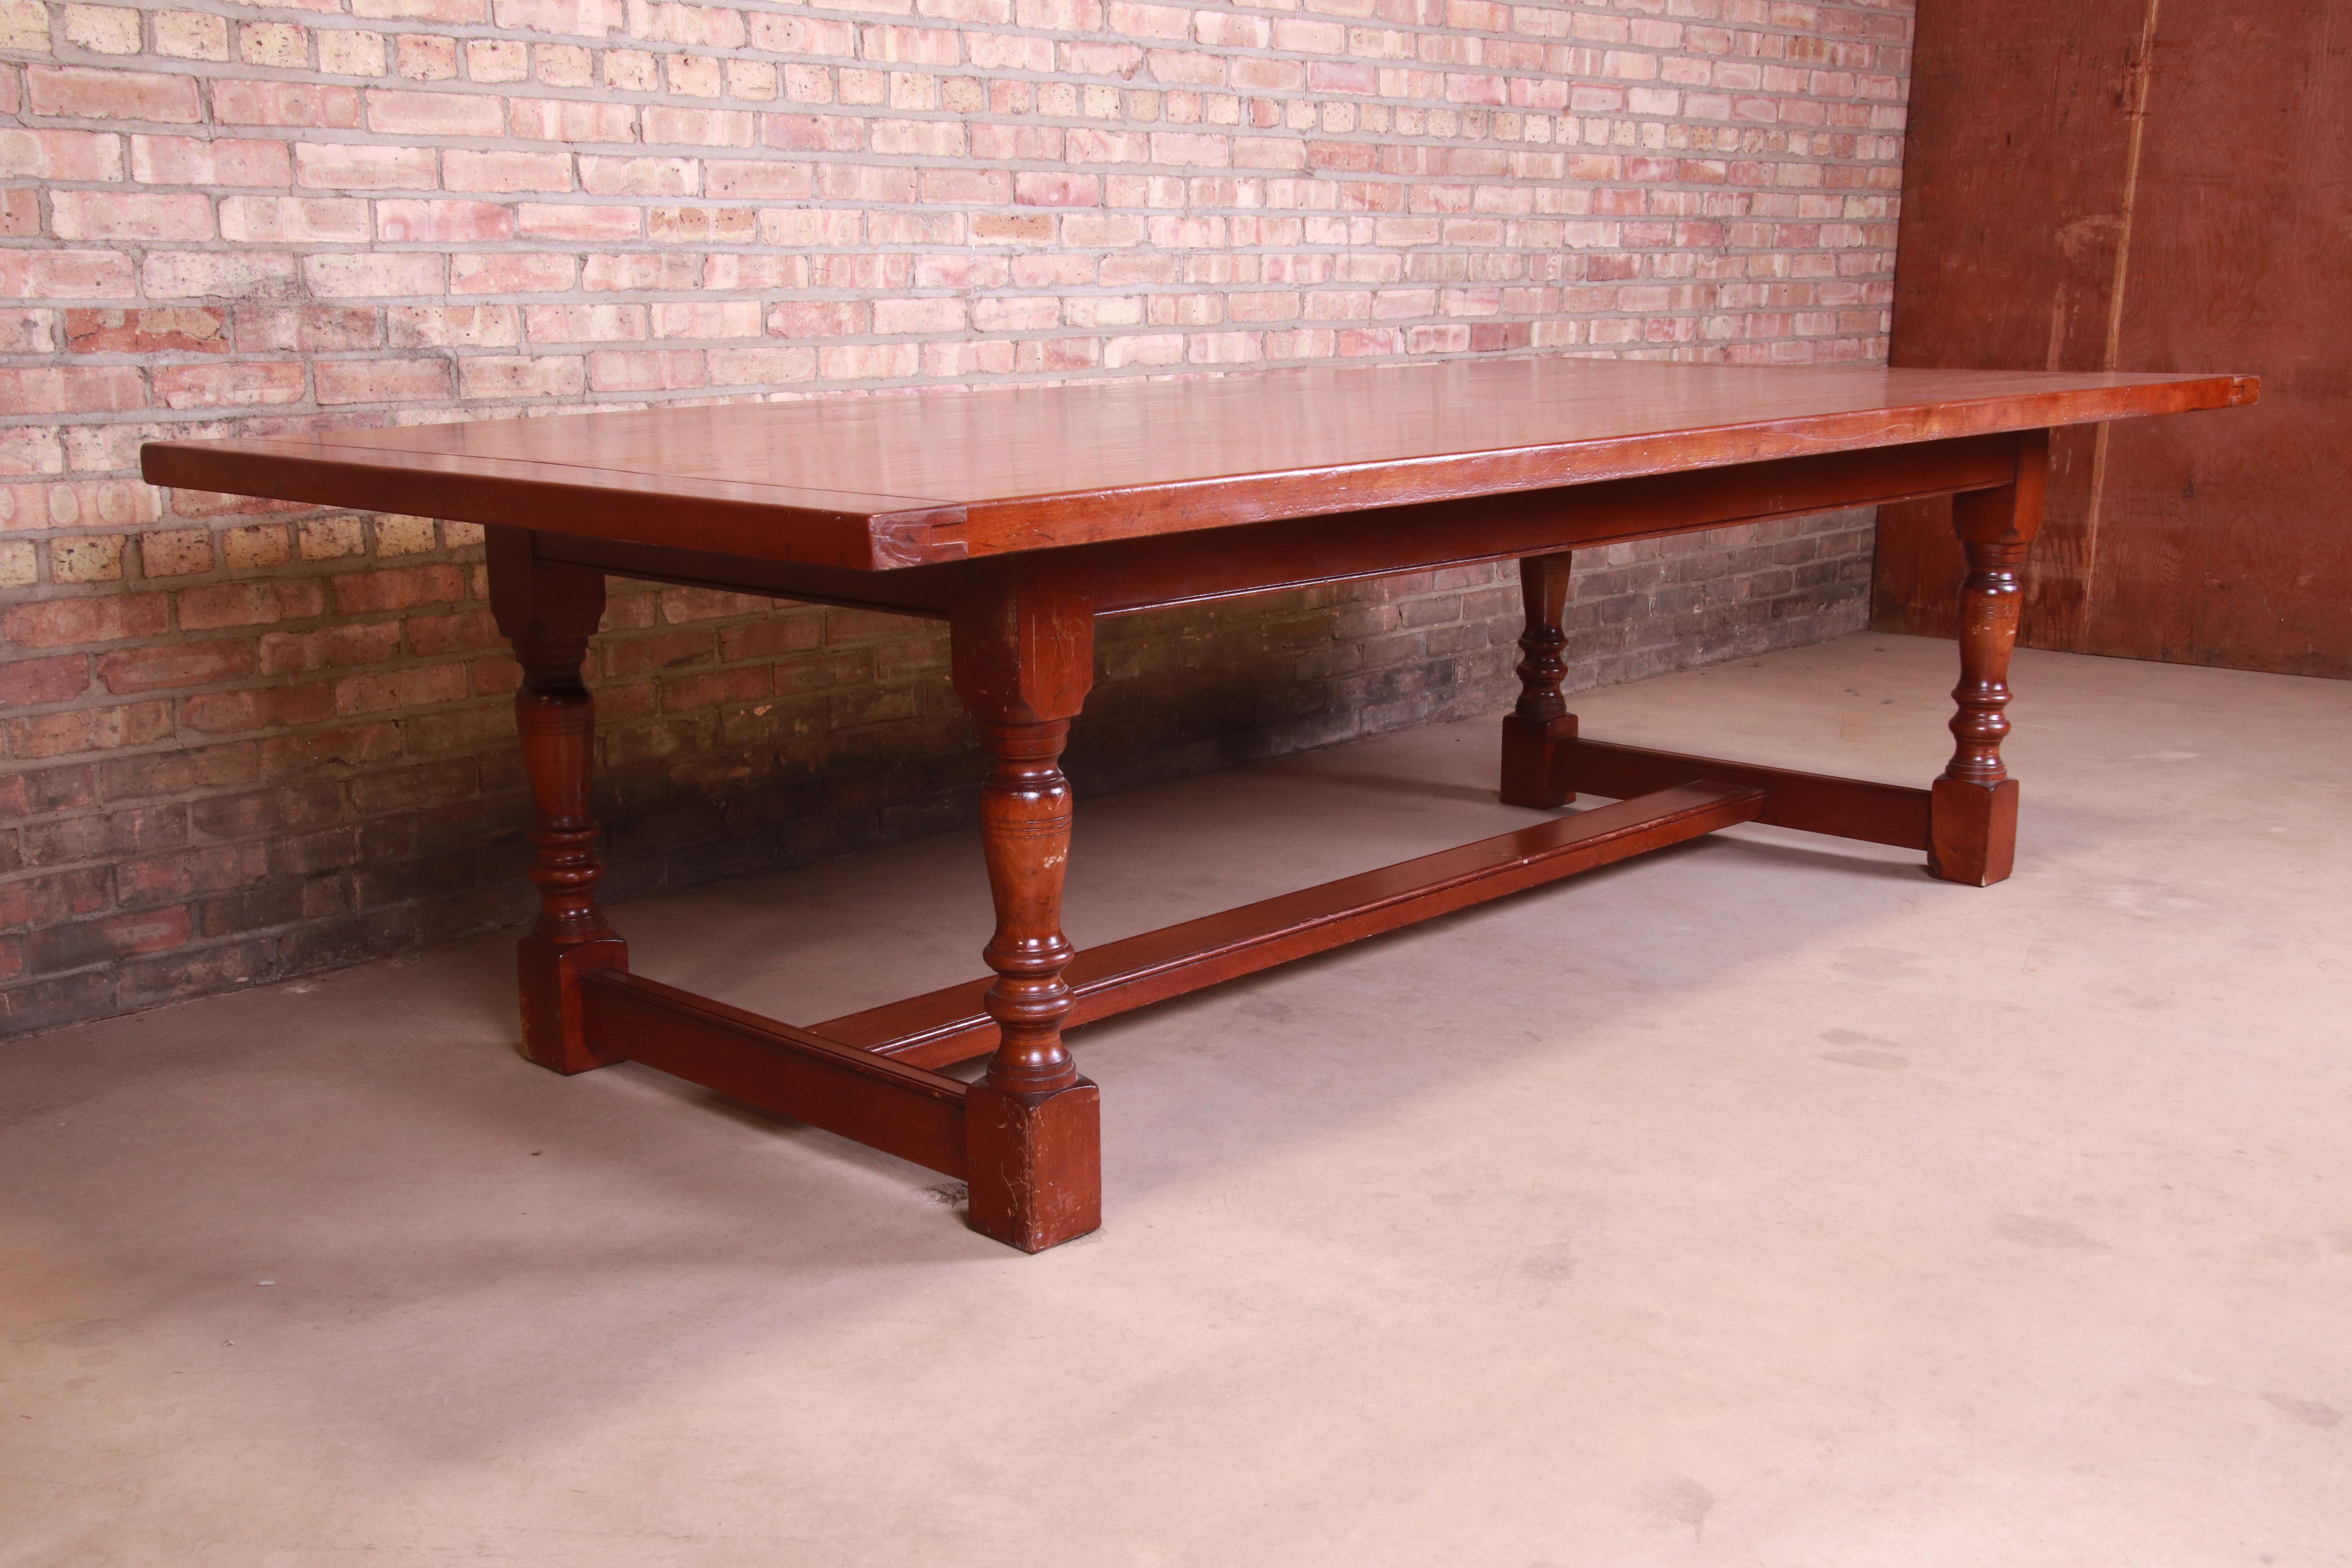 19th Century Antique English Cherry Wood Farmhouse Refectory Dining Table, Circa 1890